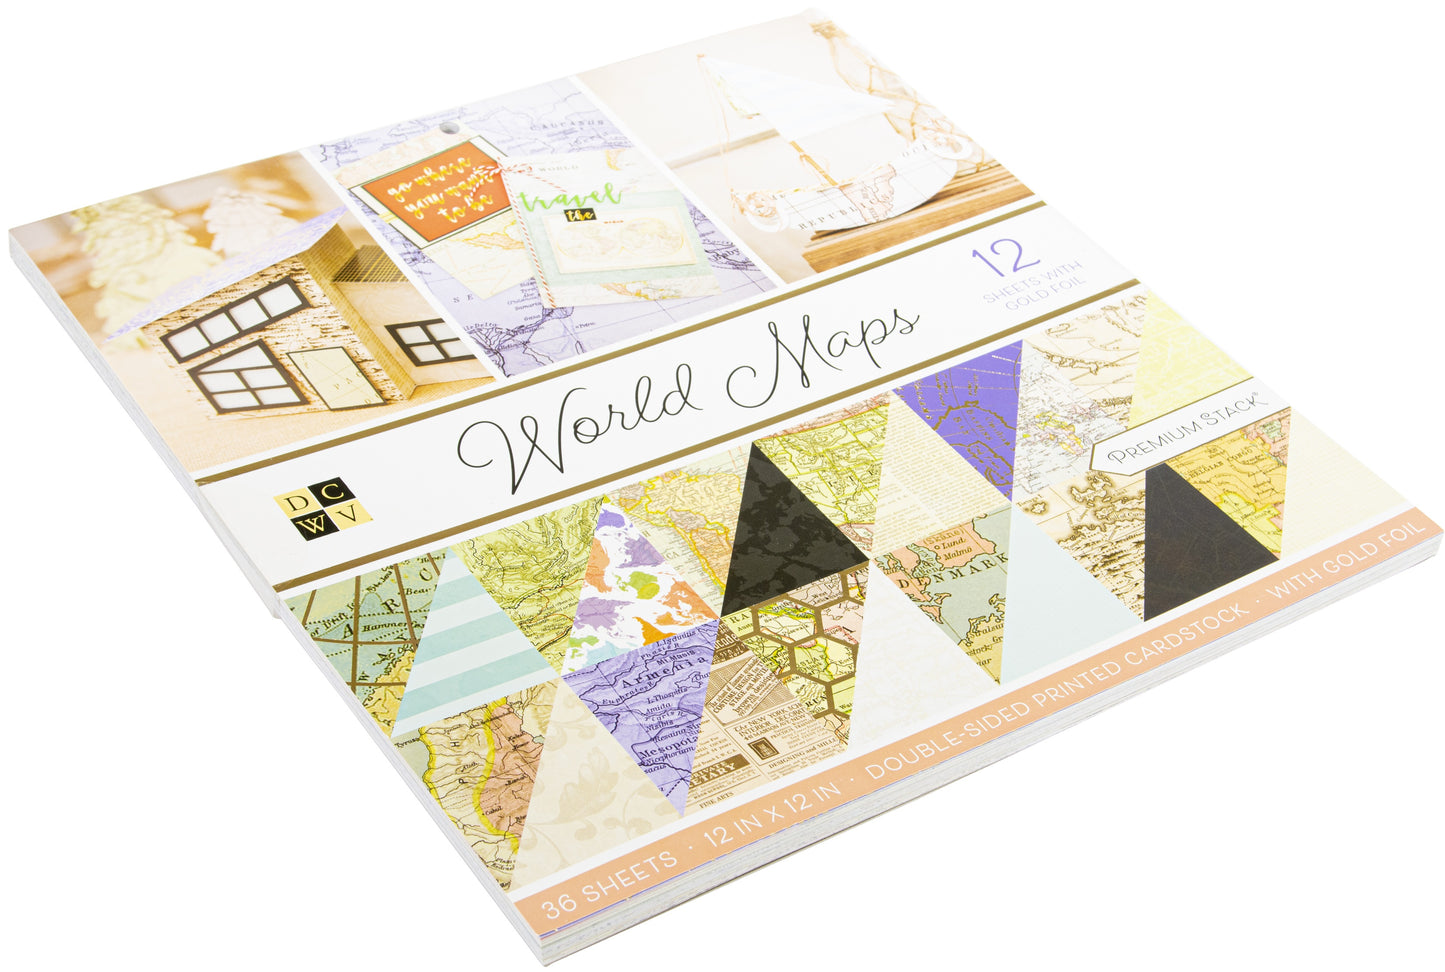 DCWV Double-Sided Cardstock Stack 12"X12" 36/Pkg-World Maps W/Foil Accents